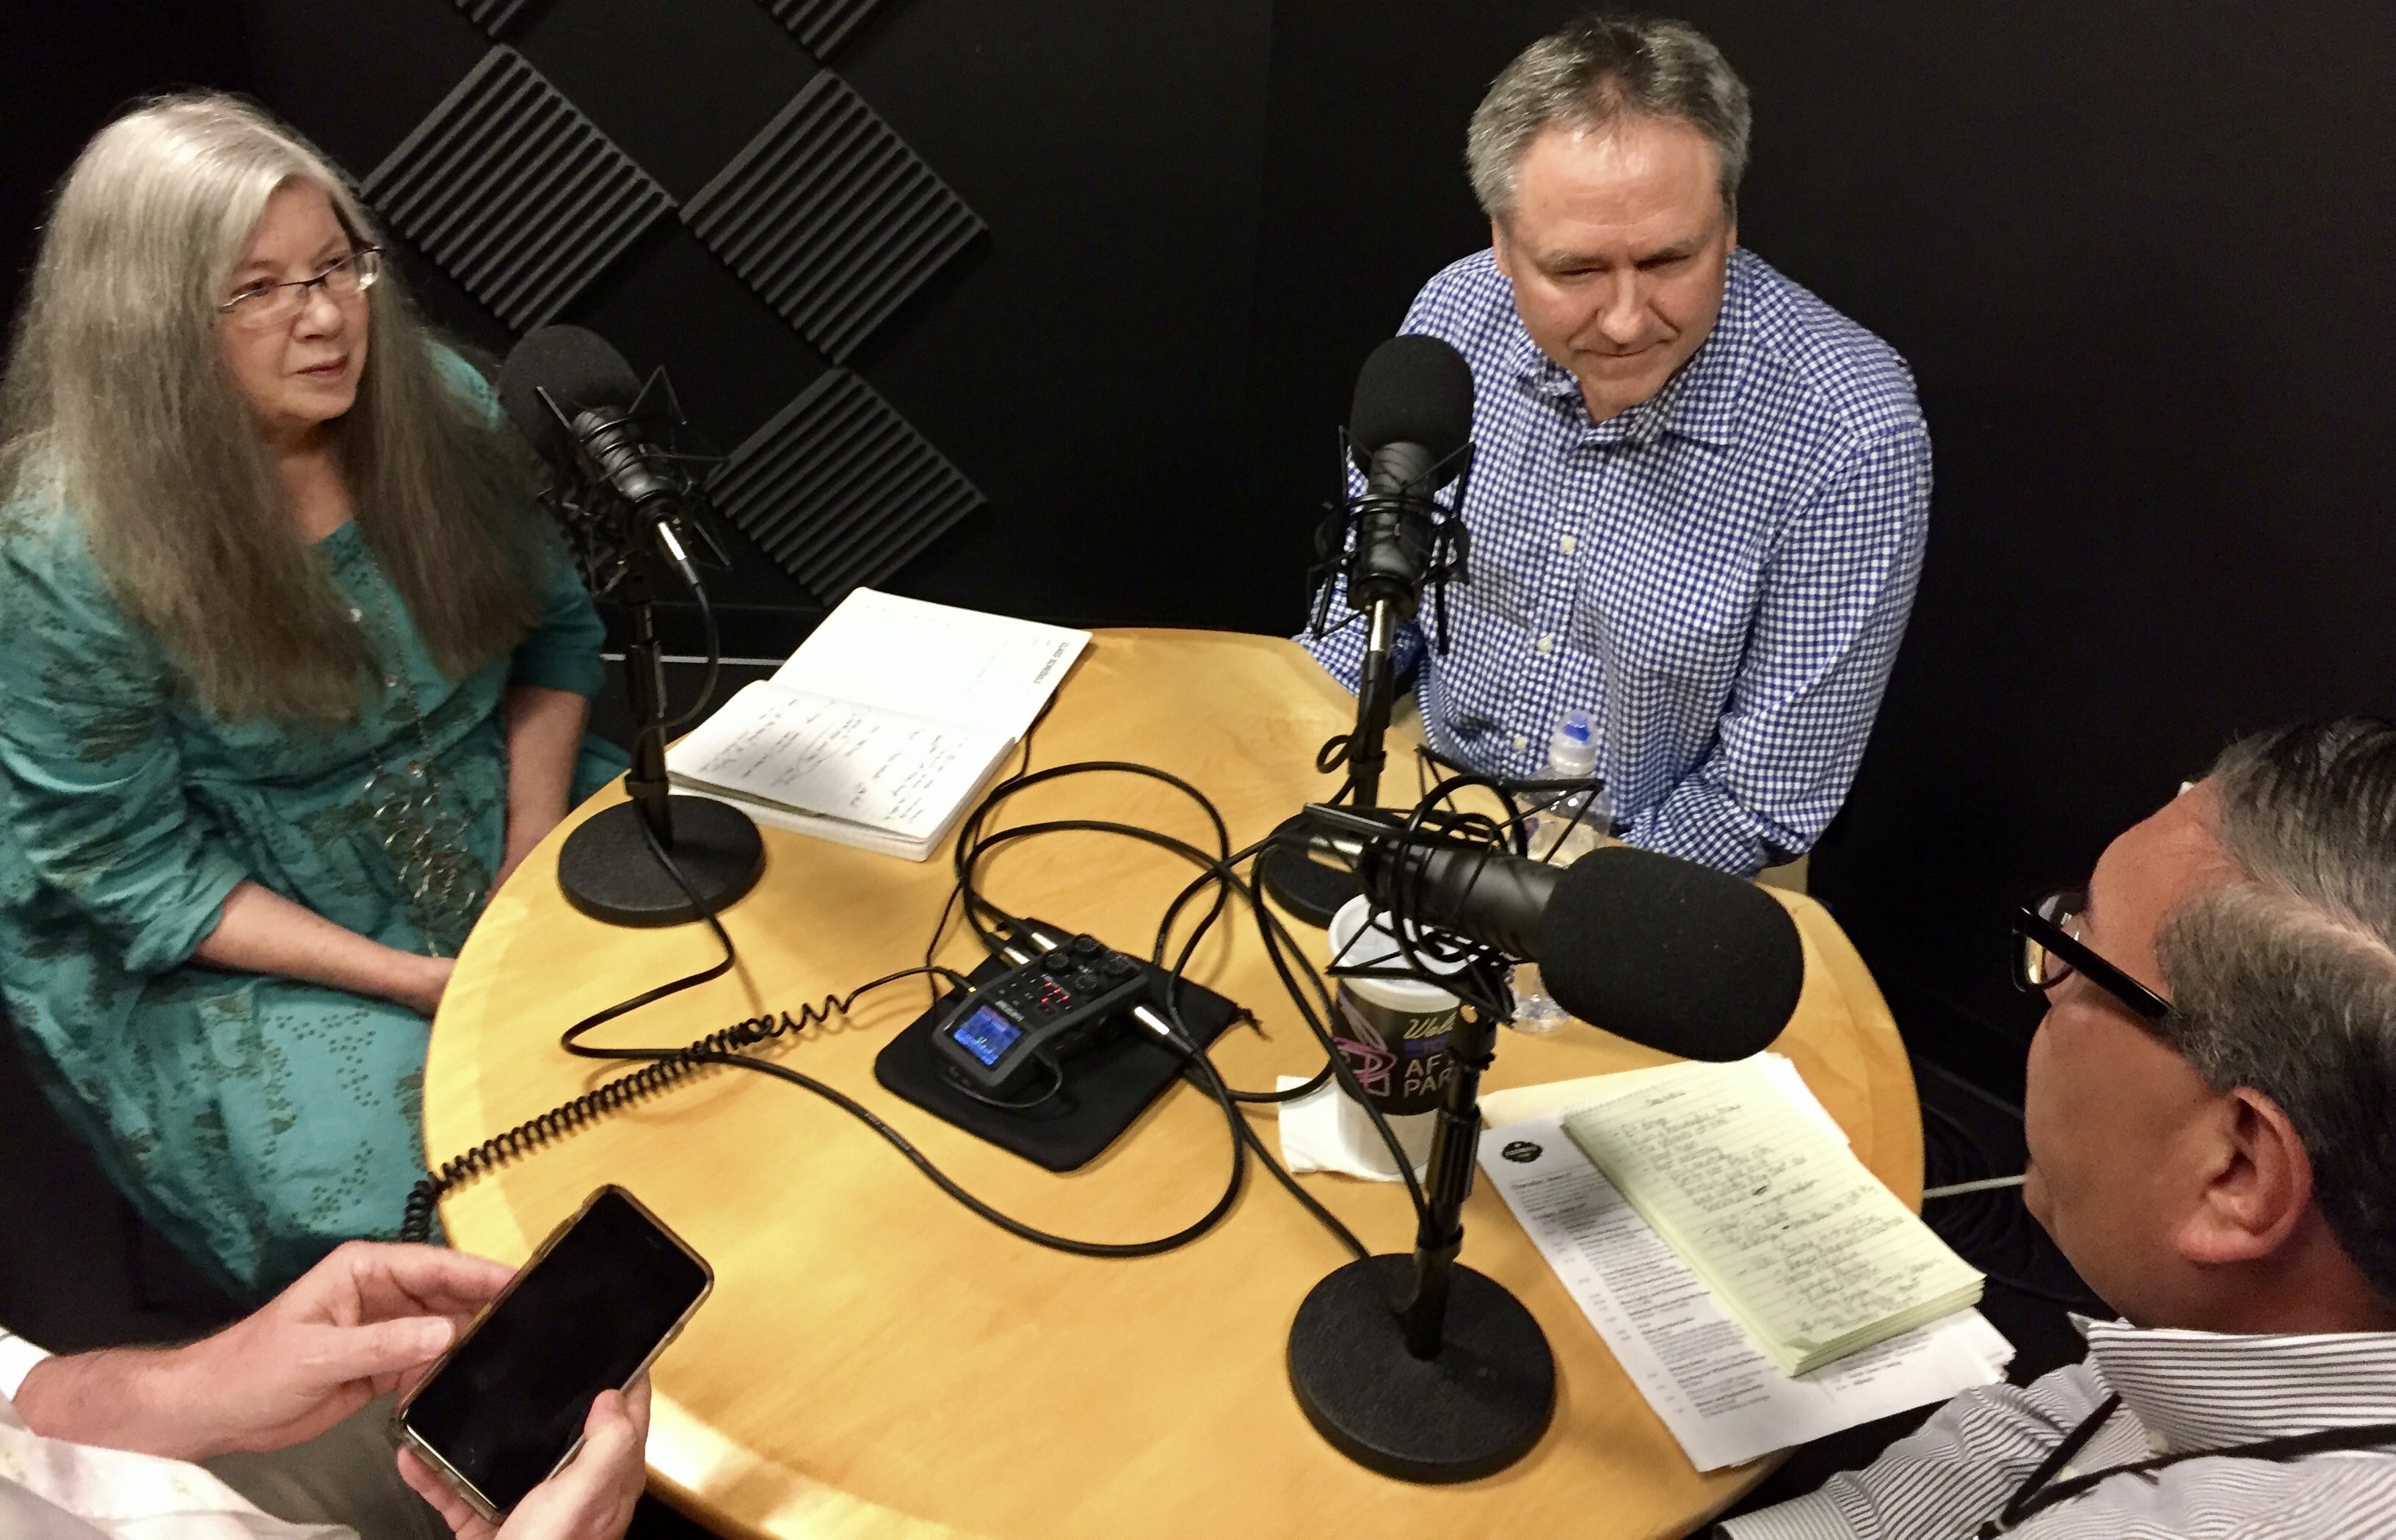 From left, Alison Cook, J.C. Reid and Greg Morago film the third episode of the Houston Chronicle's BBQ podcast. (Photo by Kristen Hare/Poynter)